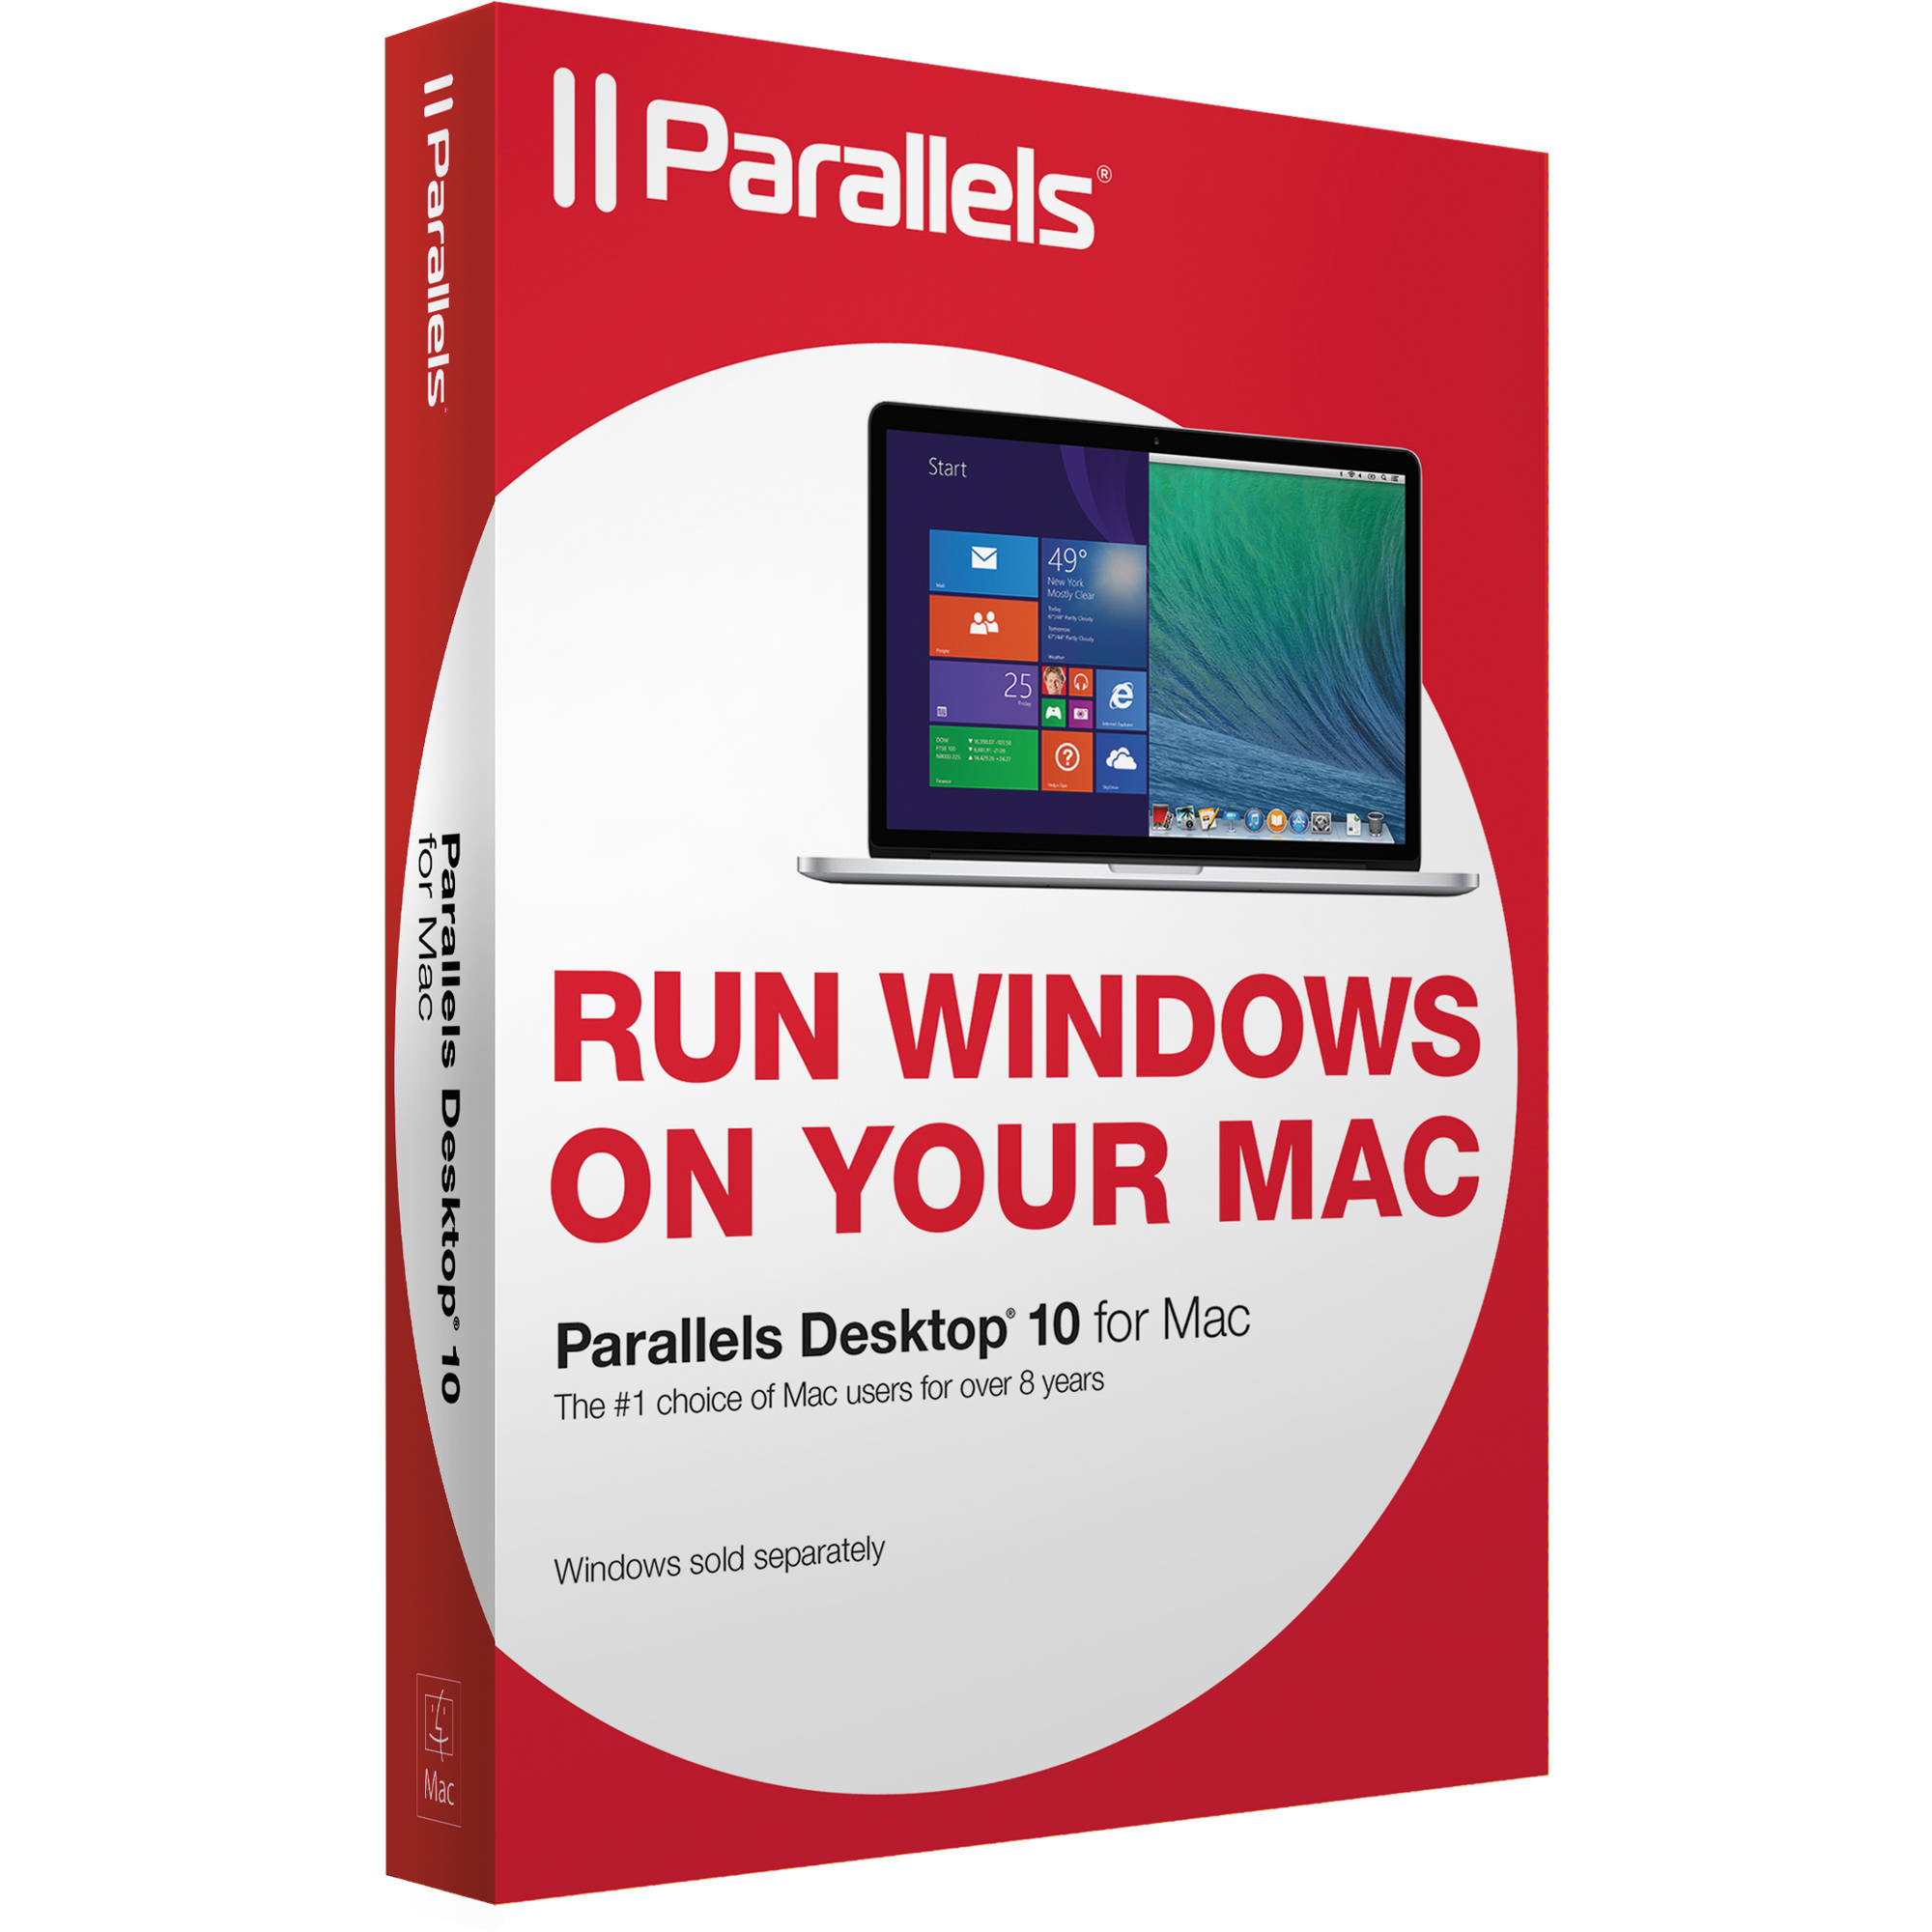 download and use cd software created for windows to use on a mac without parallels